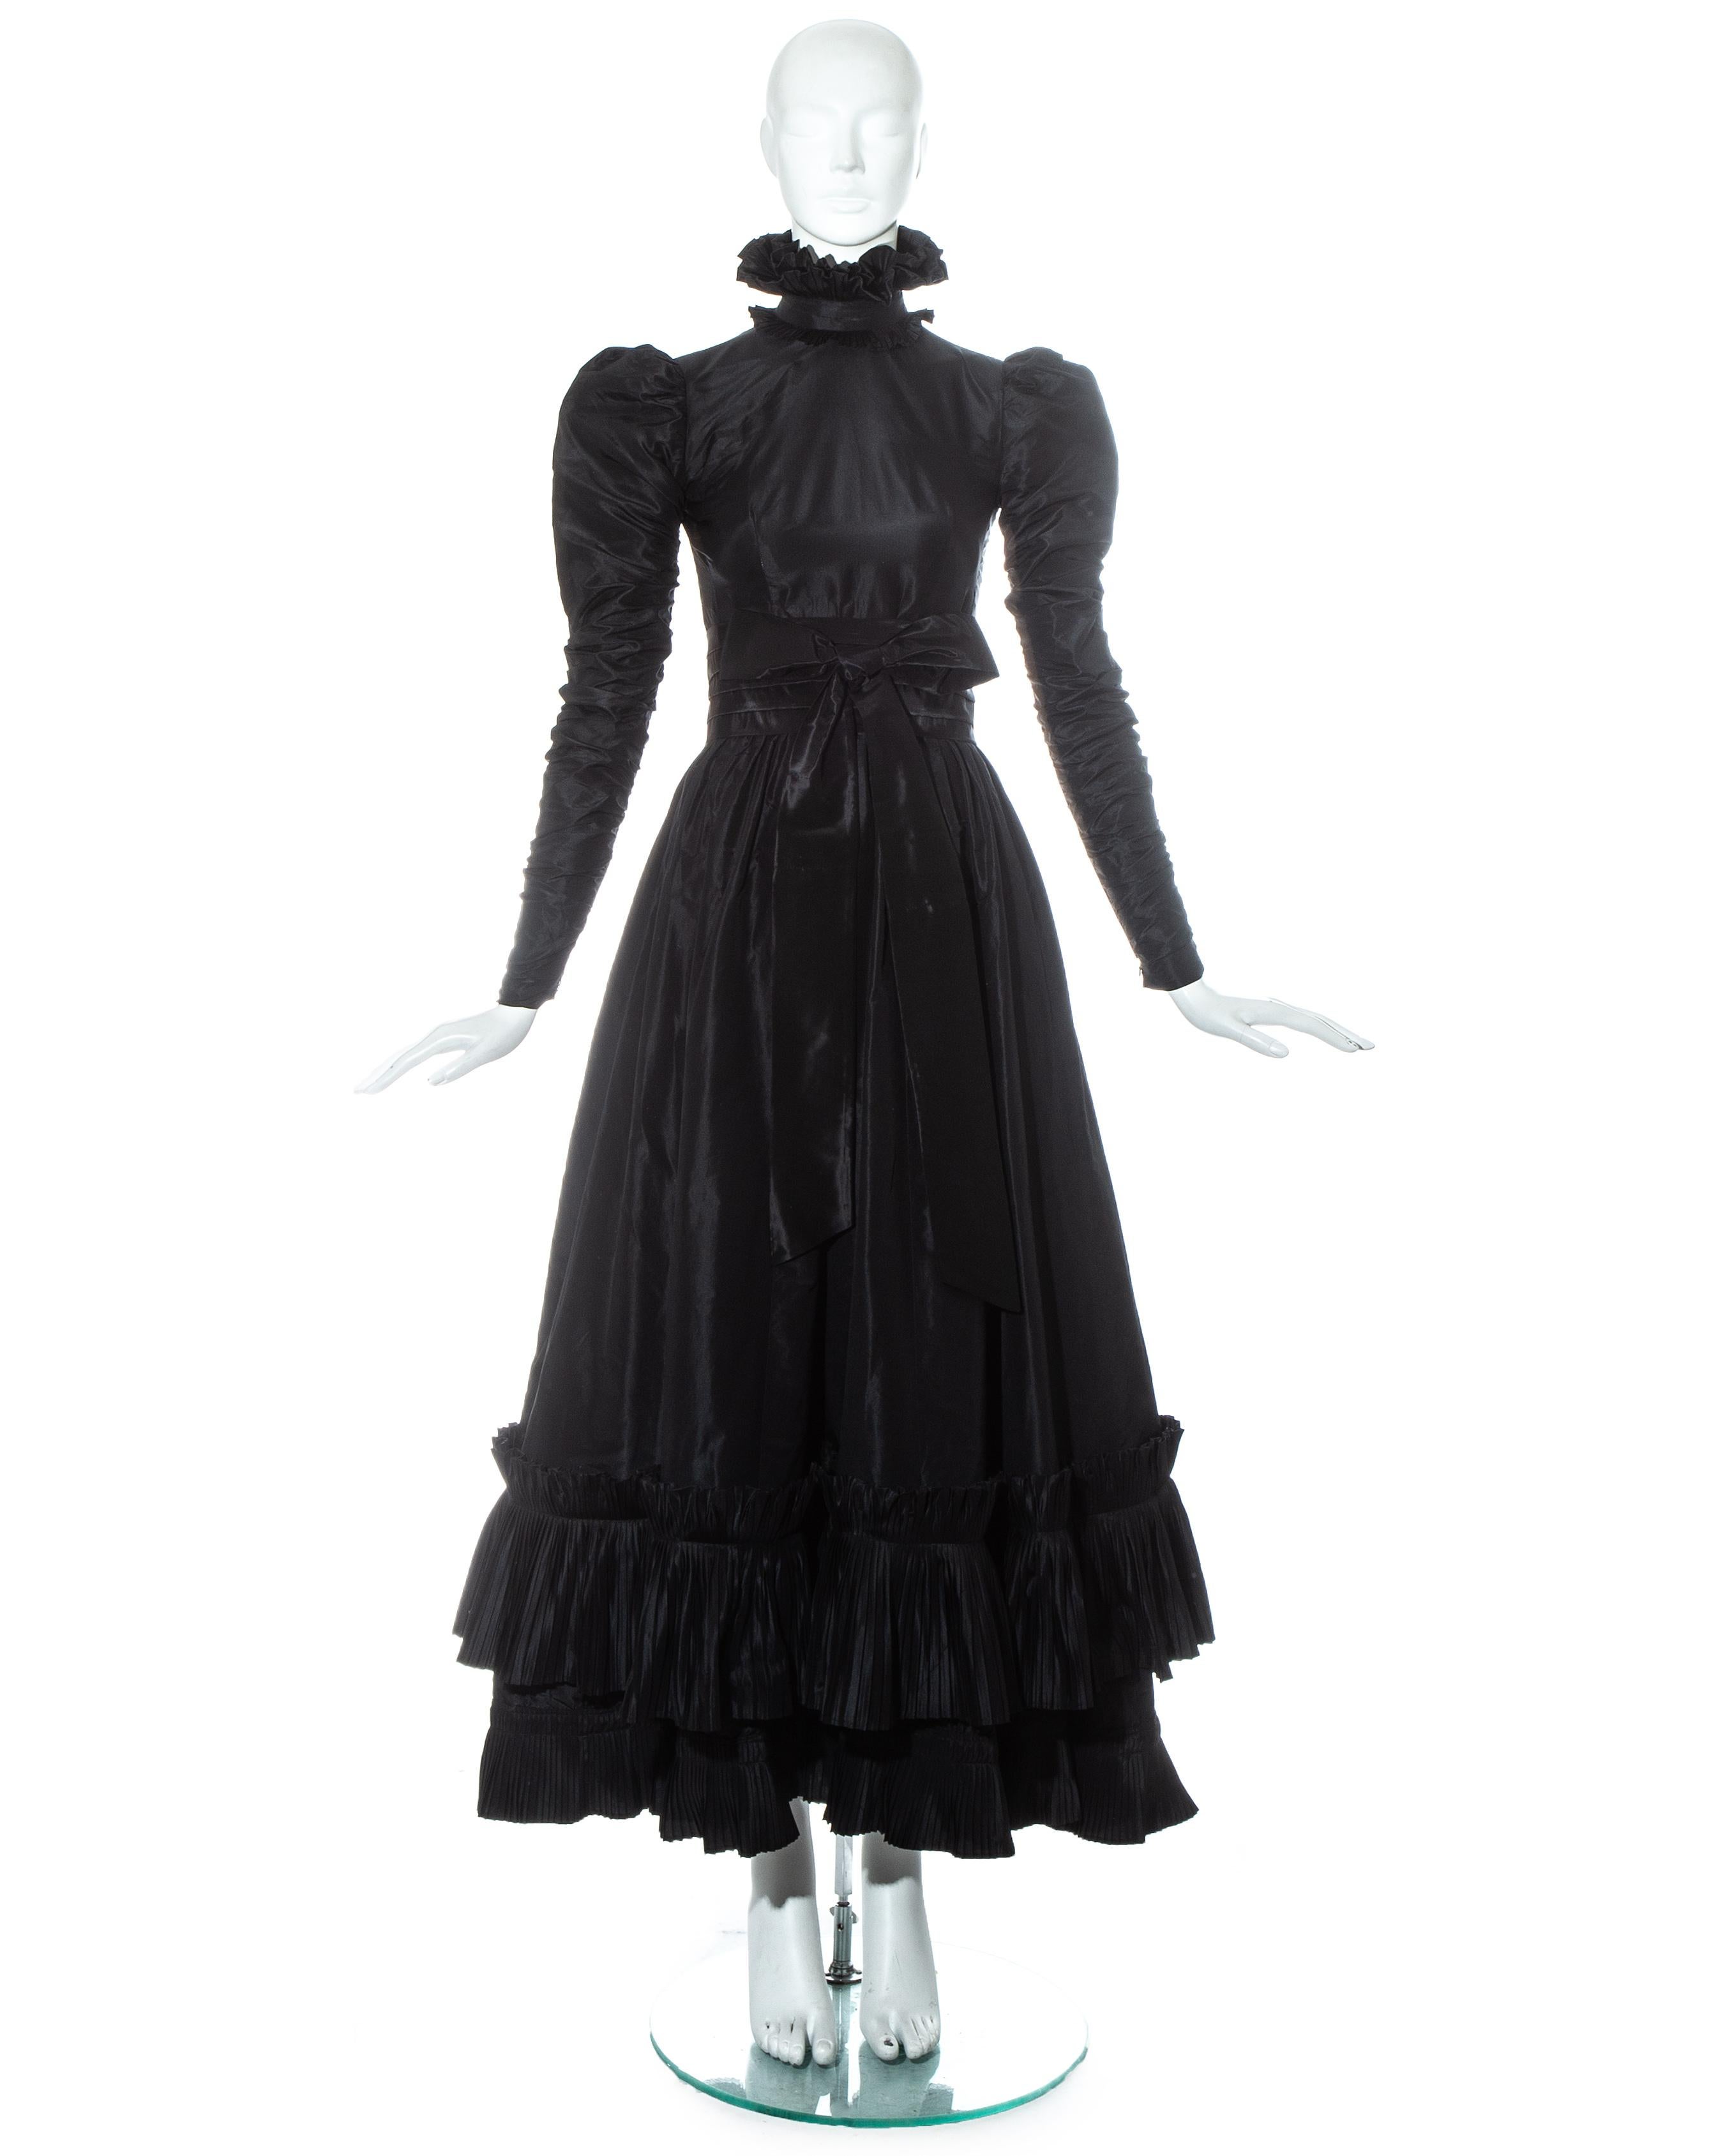 Yves Saint Laurent Haute Couture black silk taffeta evening dress.

- Puff shoulders with ruched sleeves
- High neck with accordion pleated ruffled trim
- Full skirt with accordion pleated ruffled trim 
- Pleated waist belt with decorative bow 
-